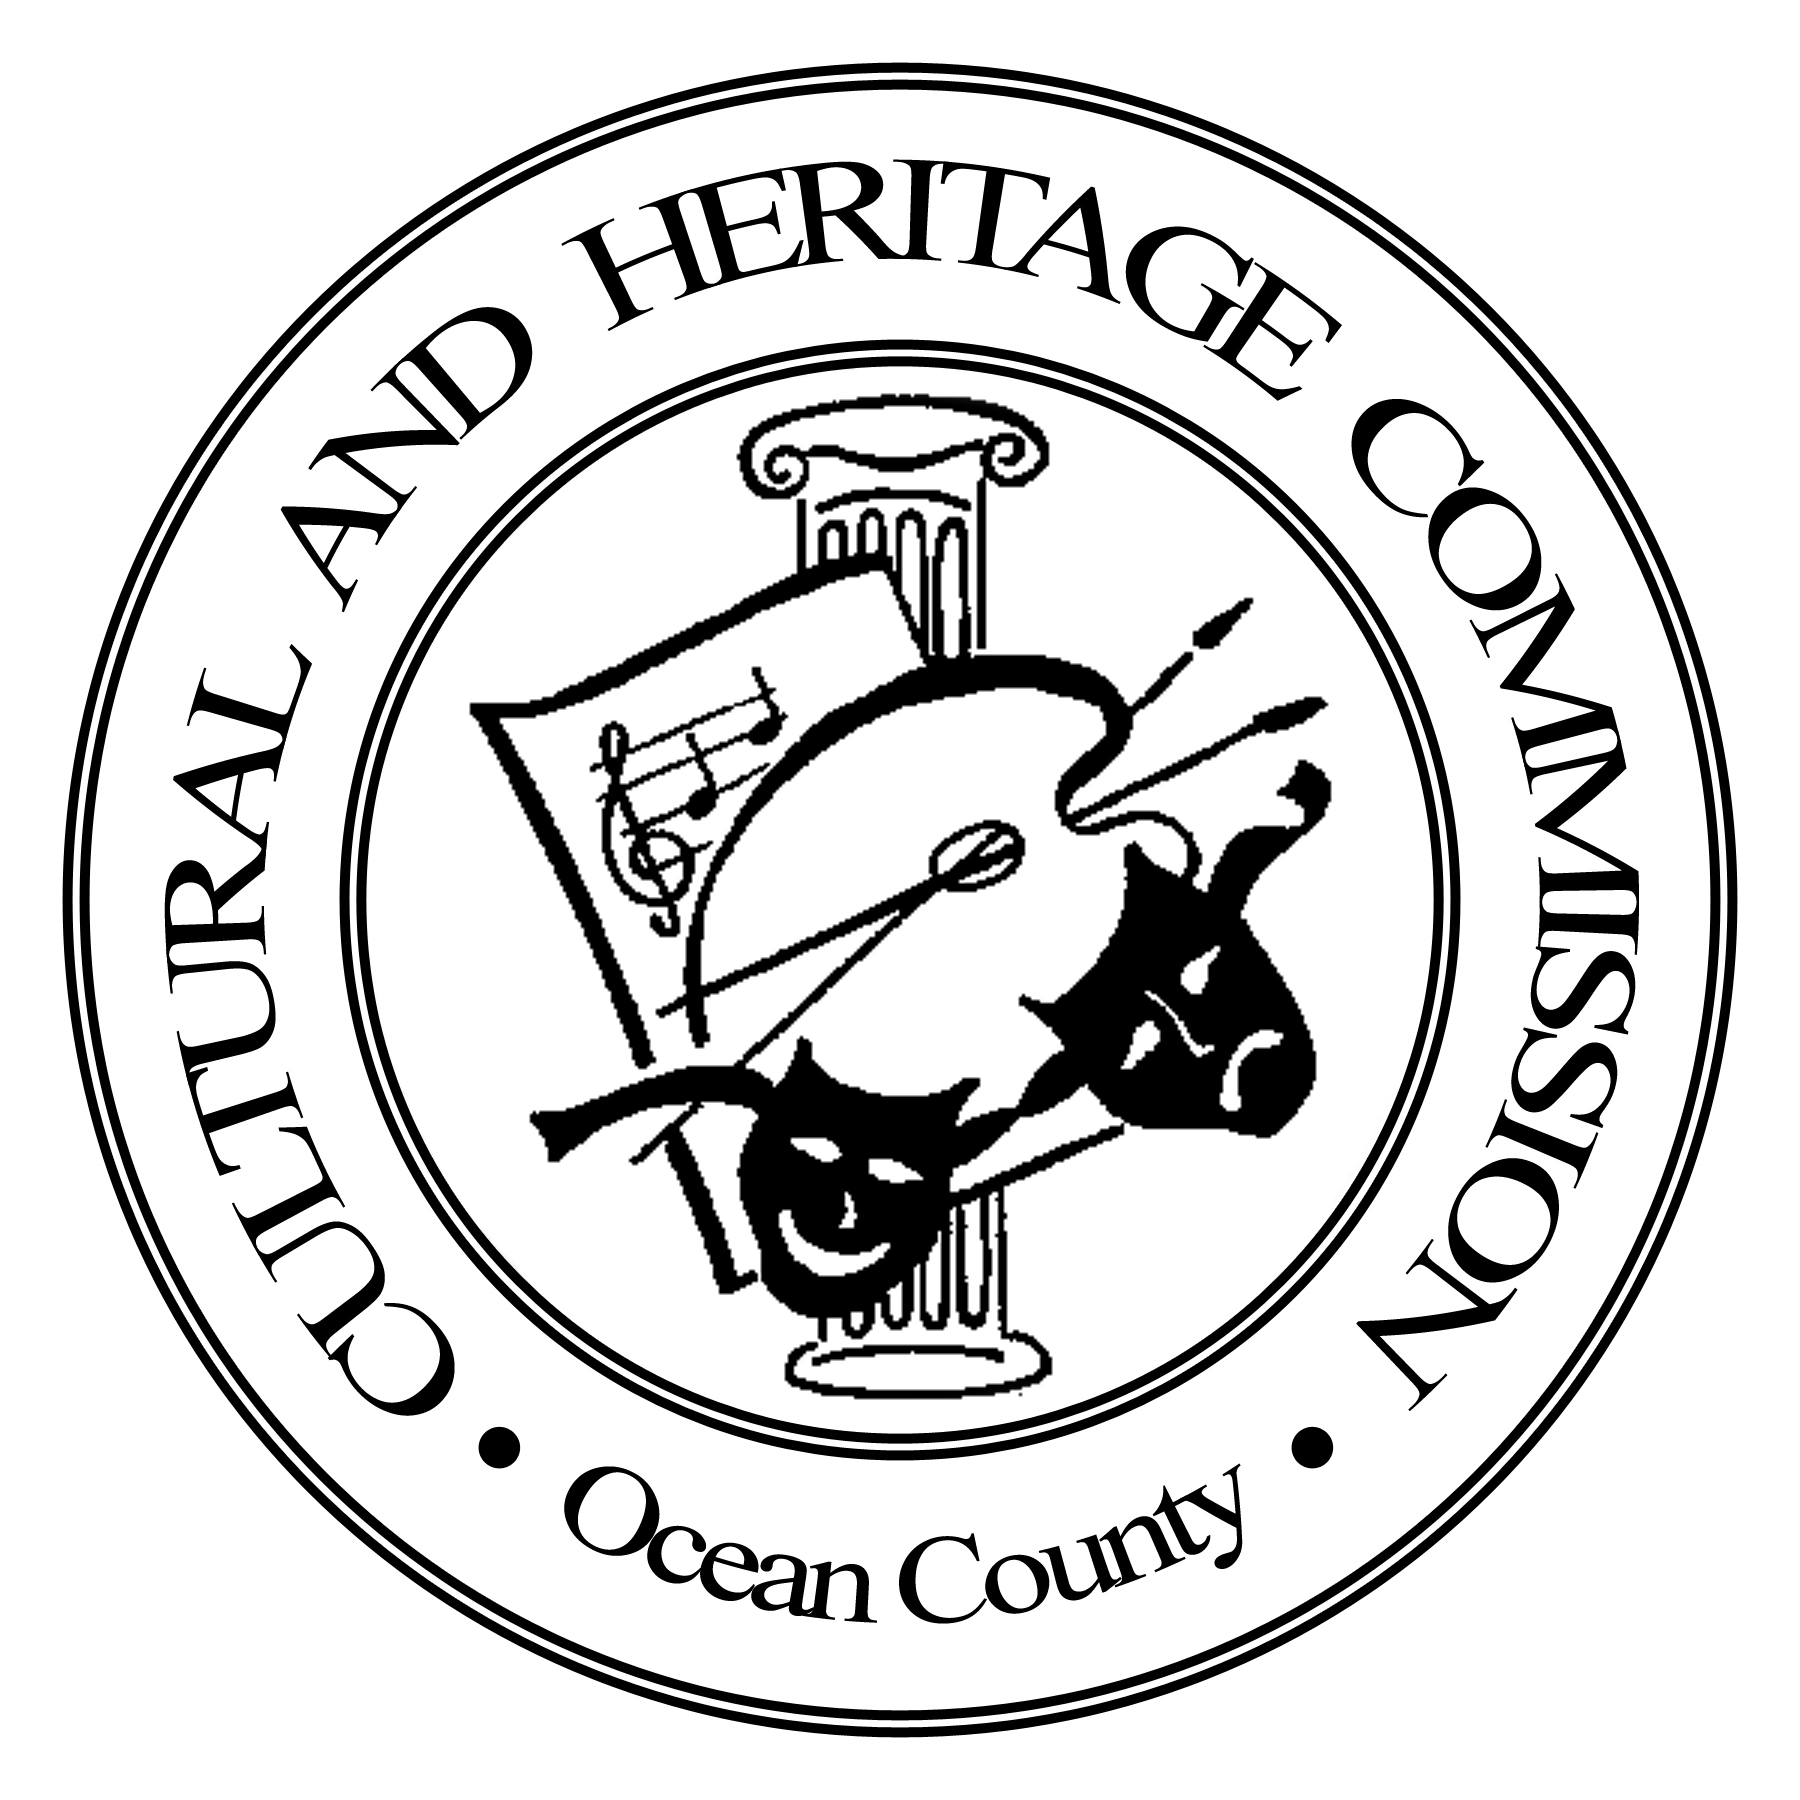 Ocean County Cultural & Heritage Commission